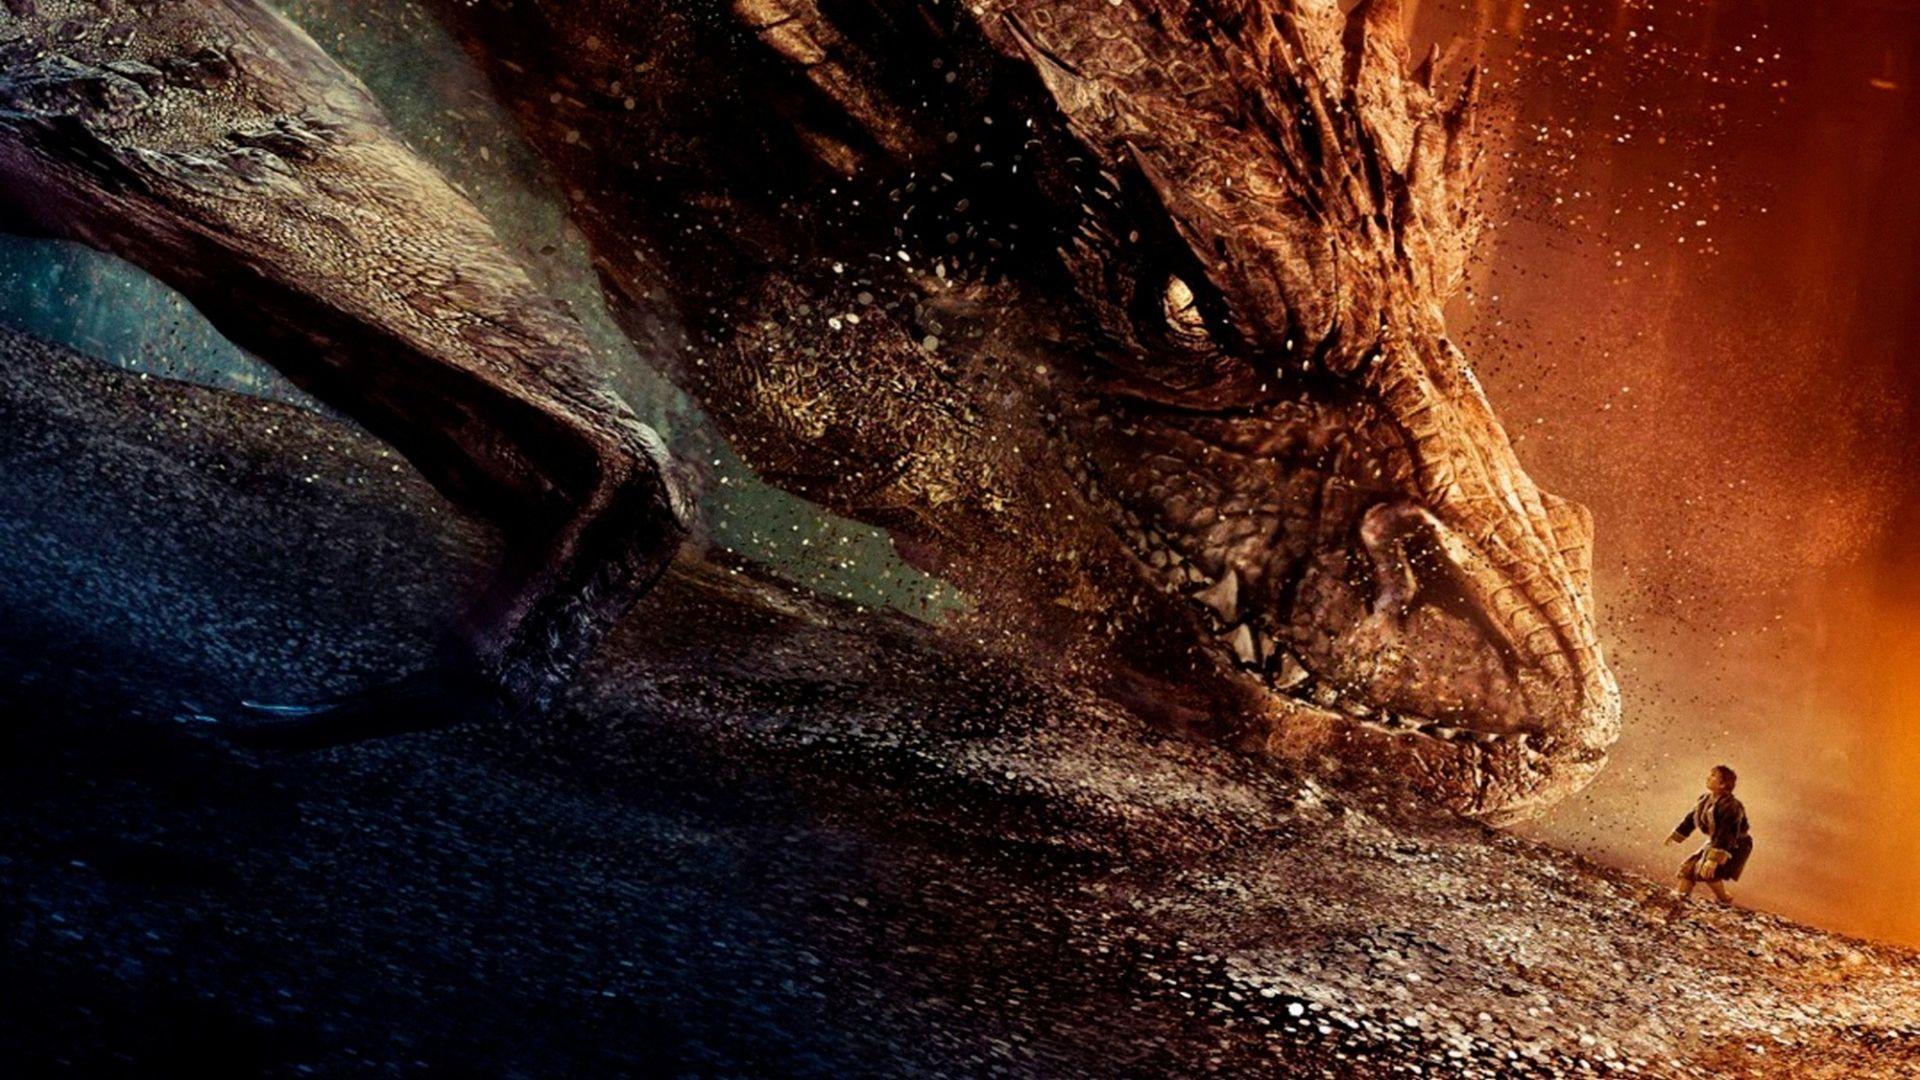 Collection of Smaug Wallpaper on HDWallpaper